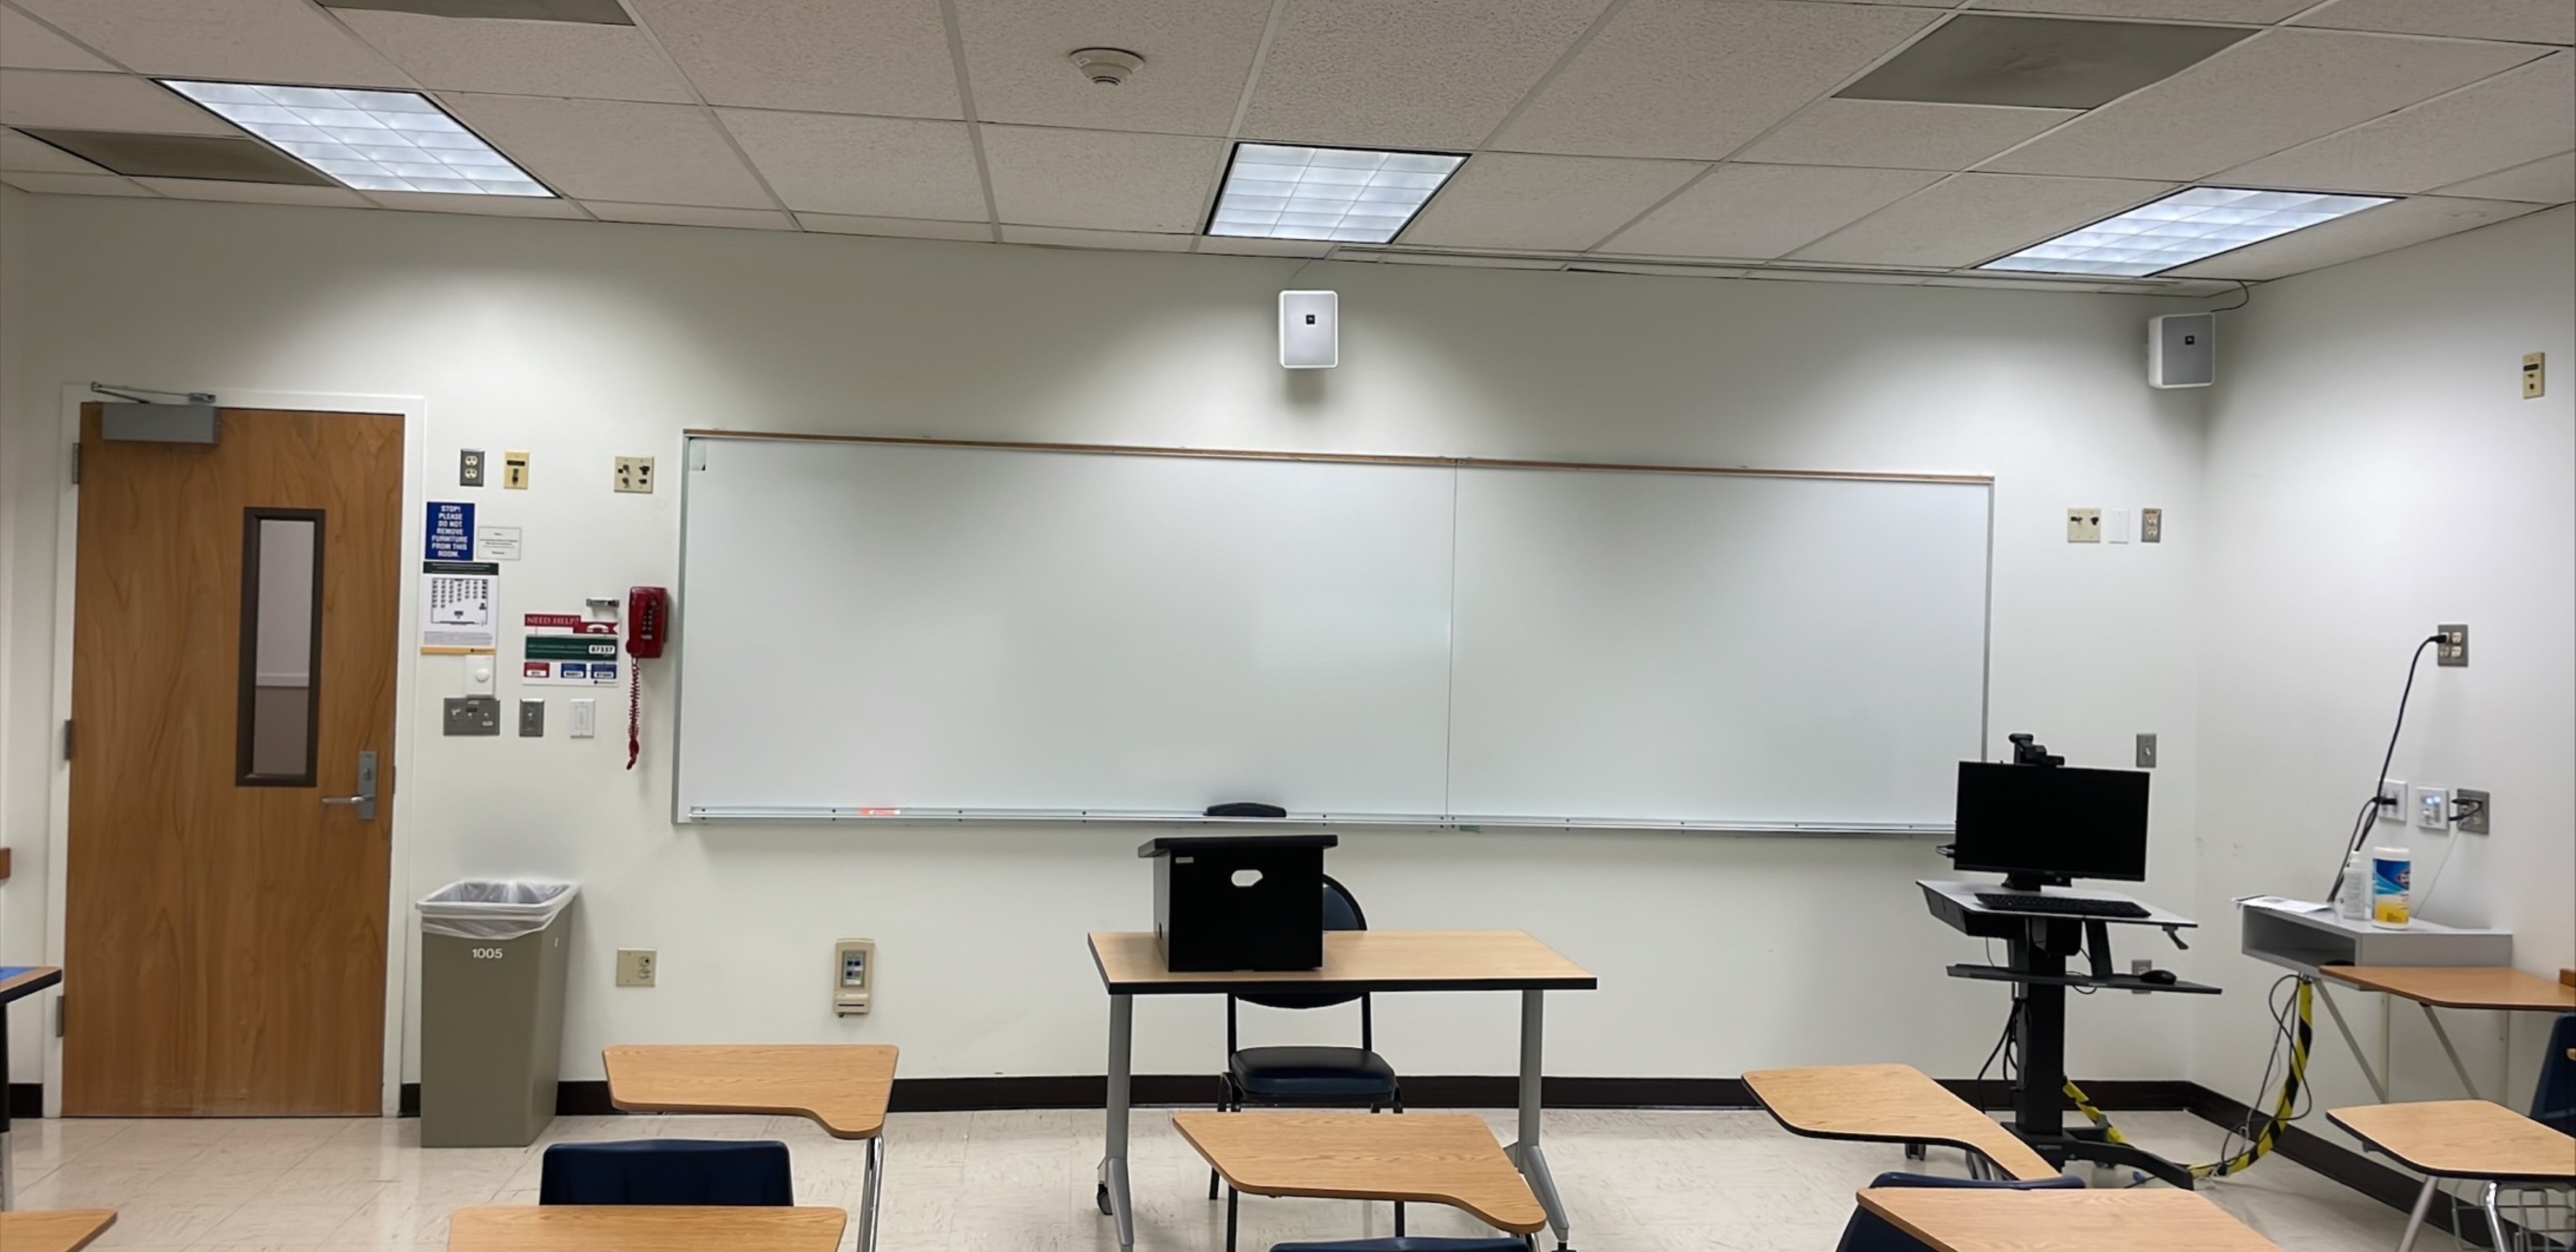 Classroom picture